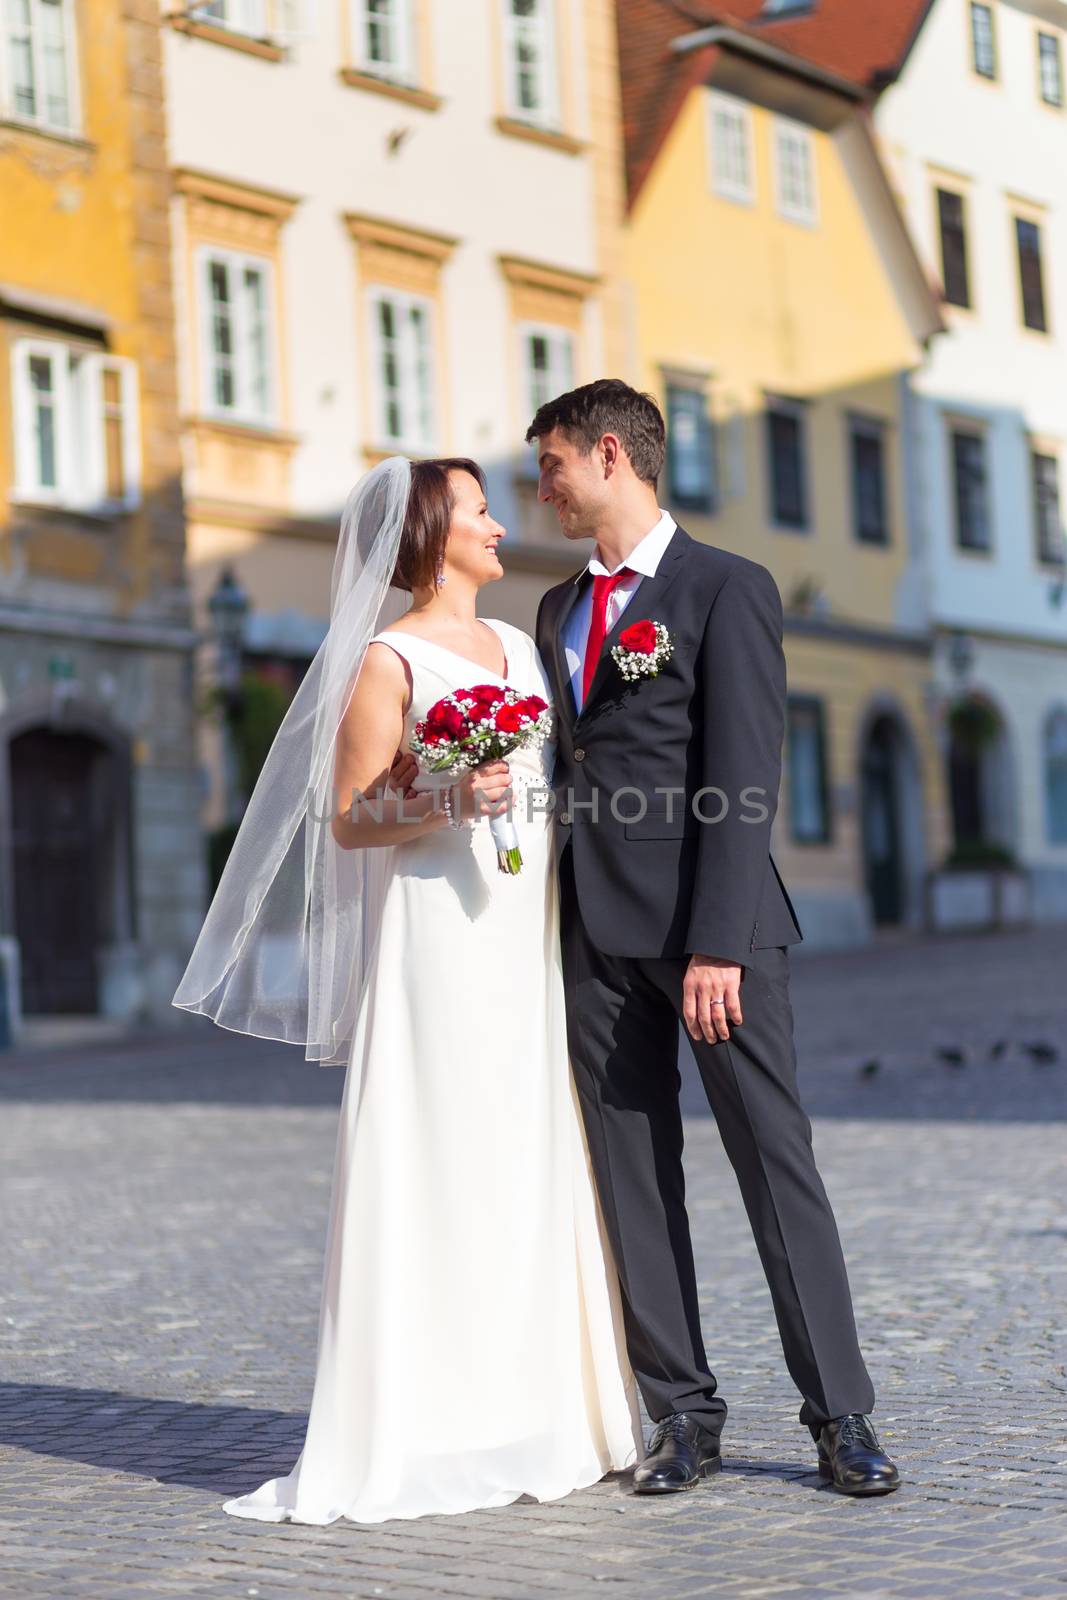 Bride and groom. Portrait of a loving wedding couple on cobbled street in medieval city center of Ljubljana, Slovenia.